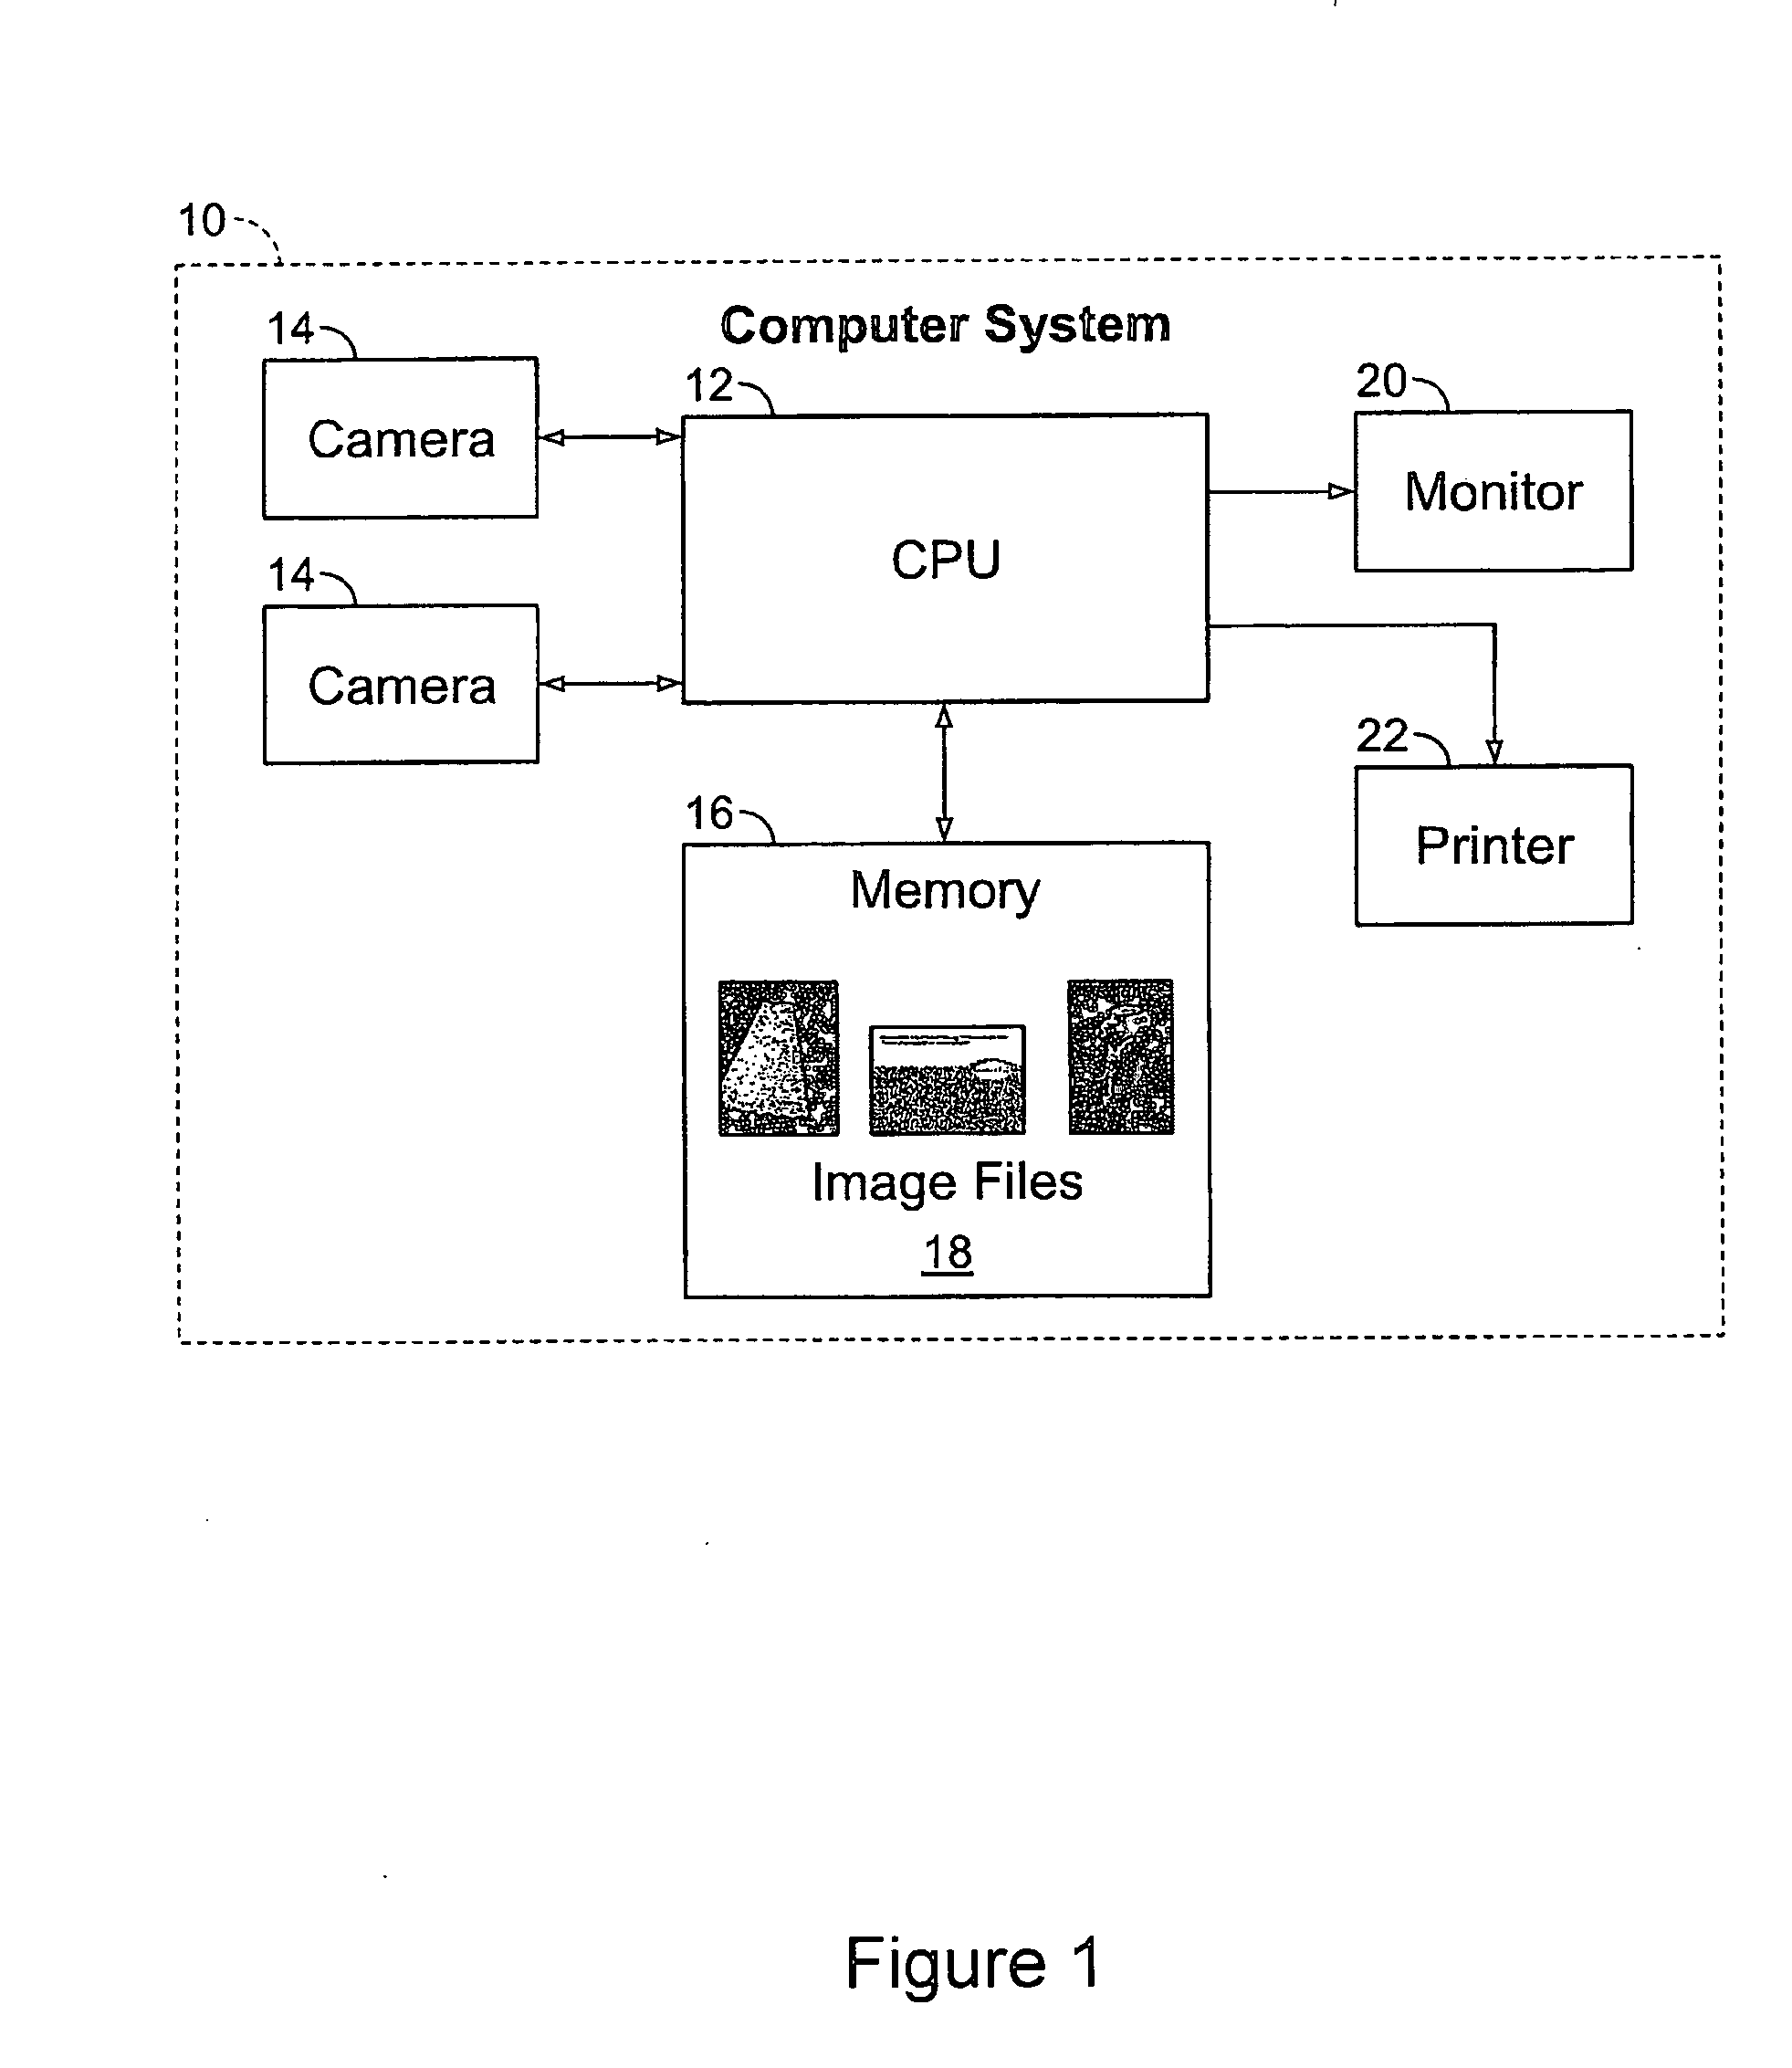 Method and system for learning object recognition in images